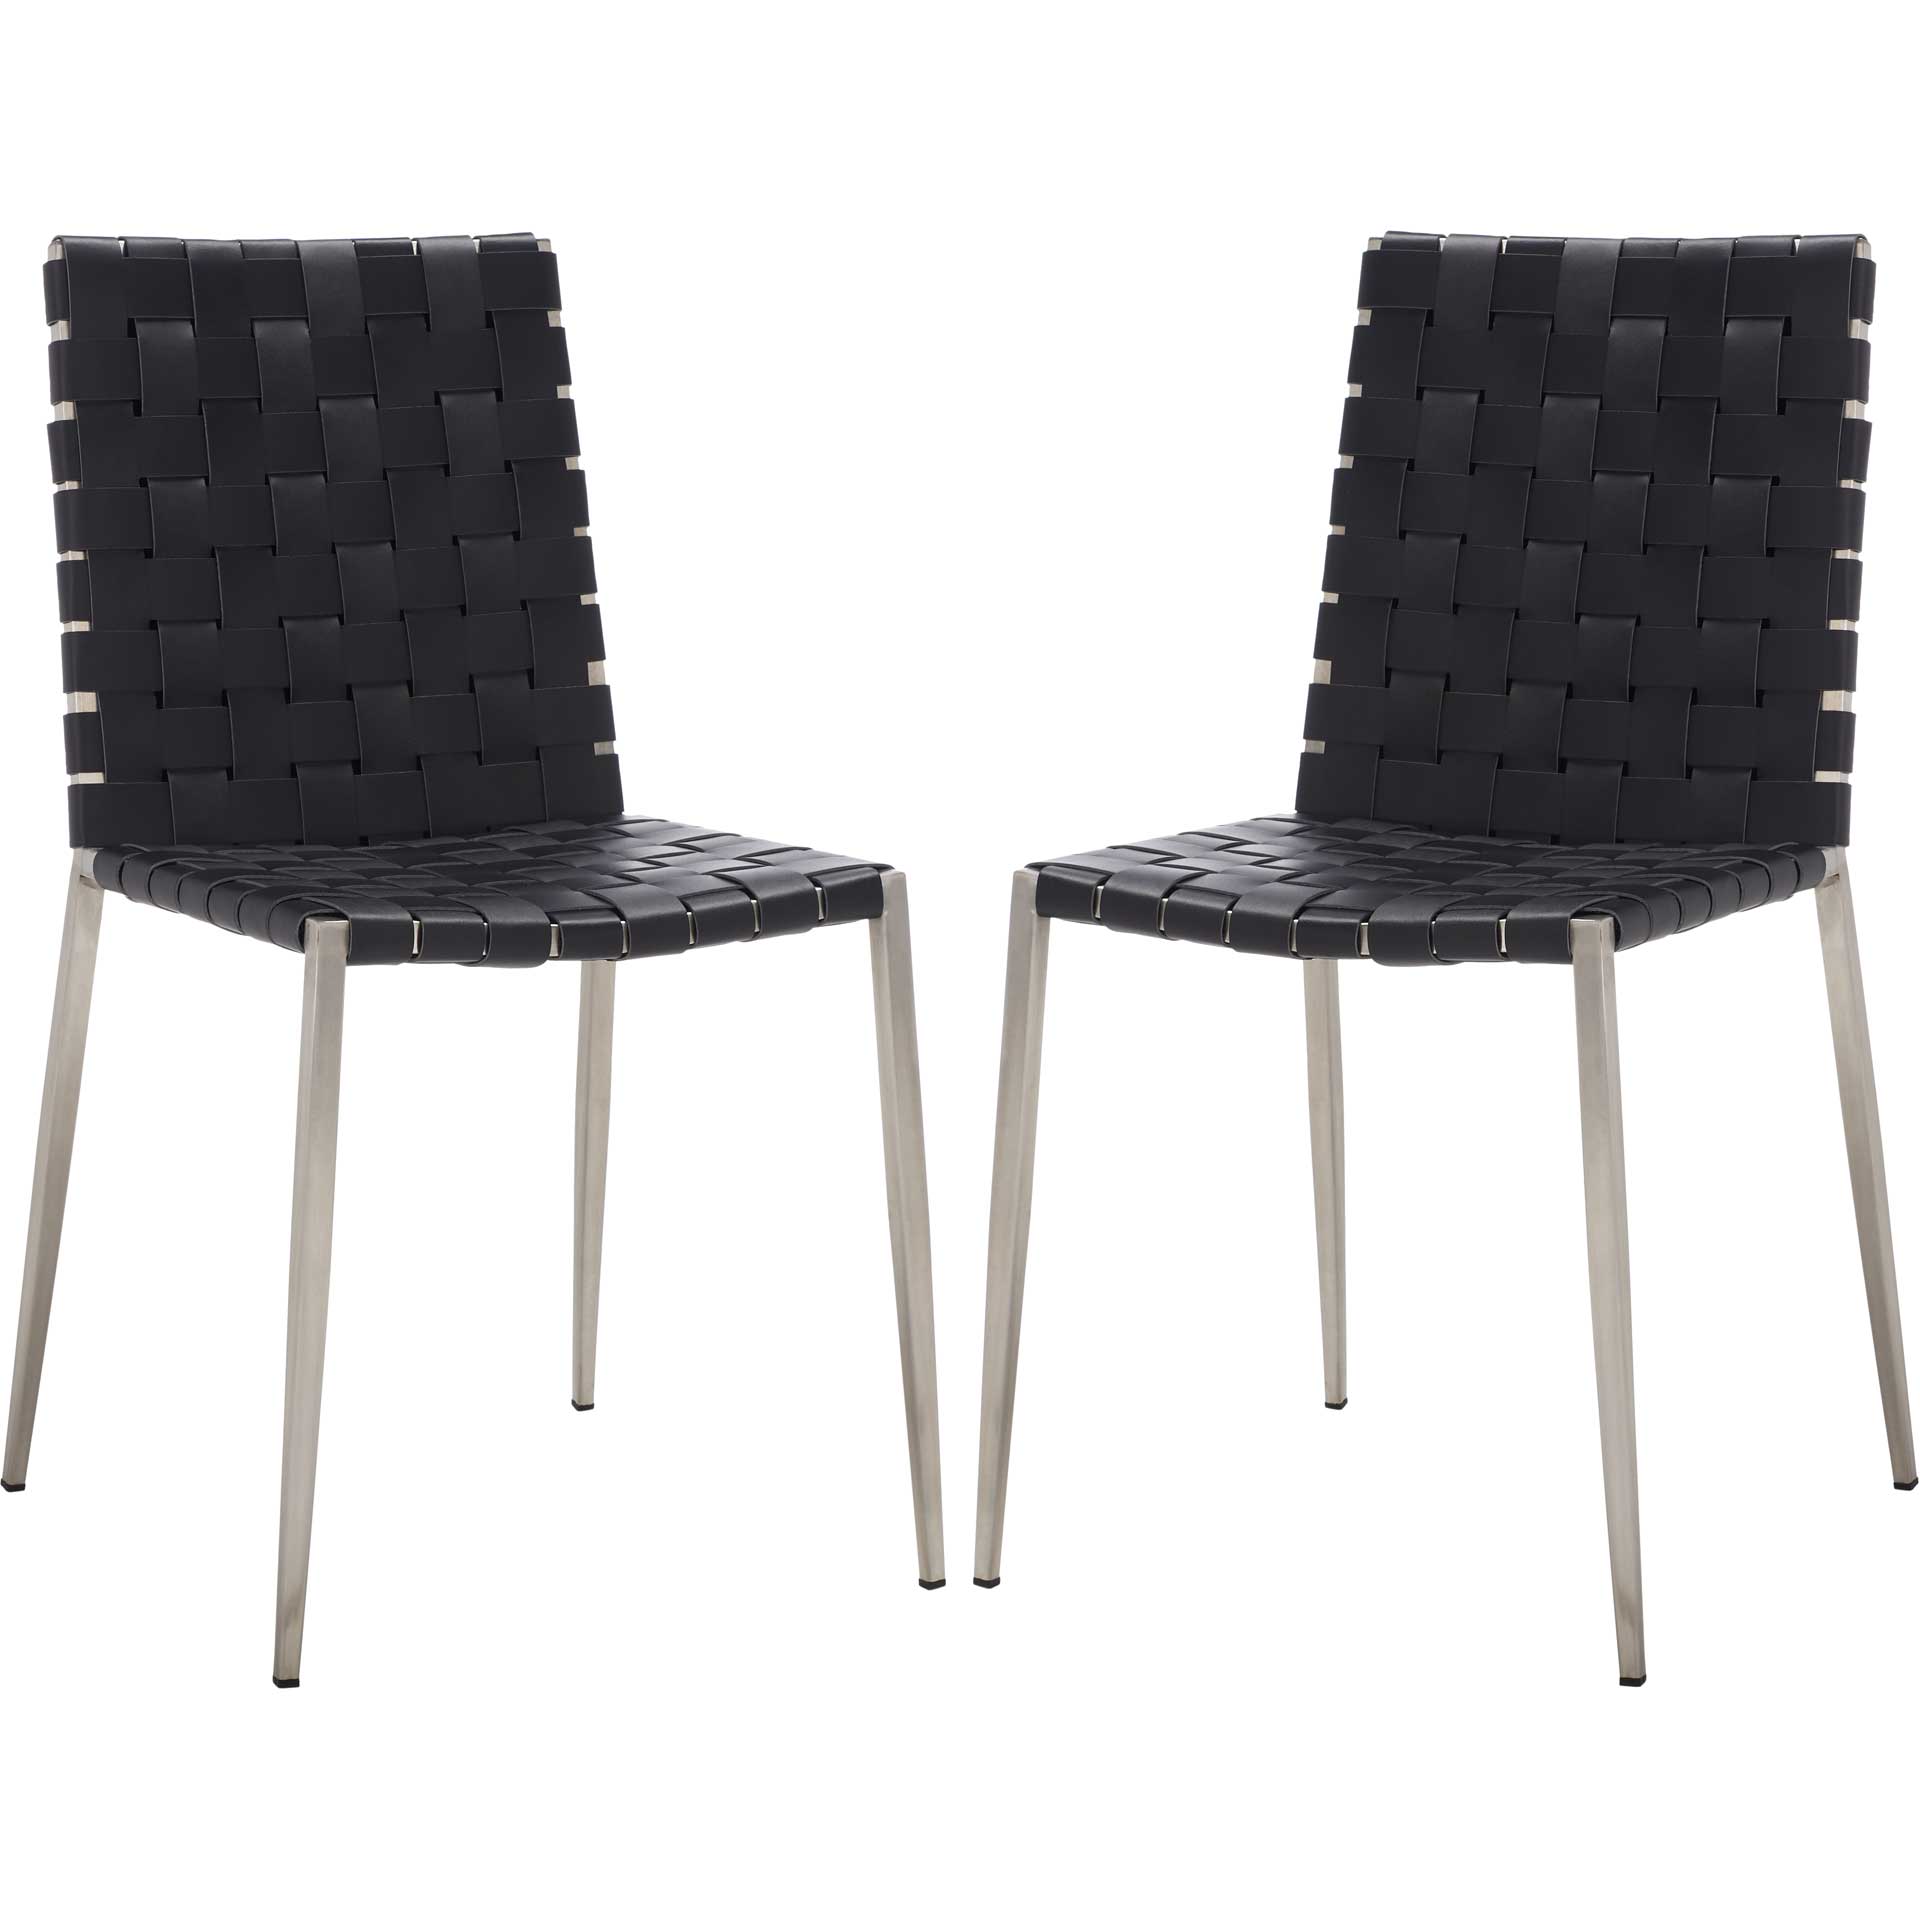 Ralen Woven Dining Chair Black/Silver (Set of 2)